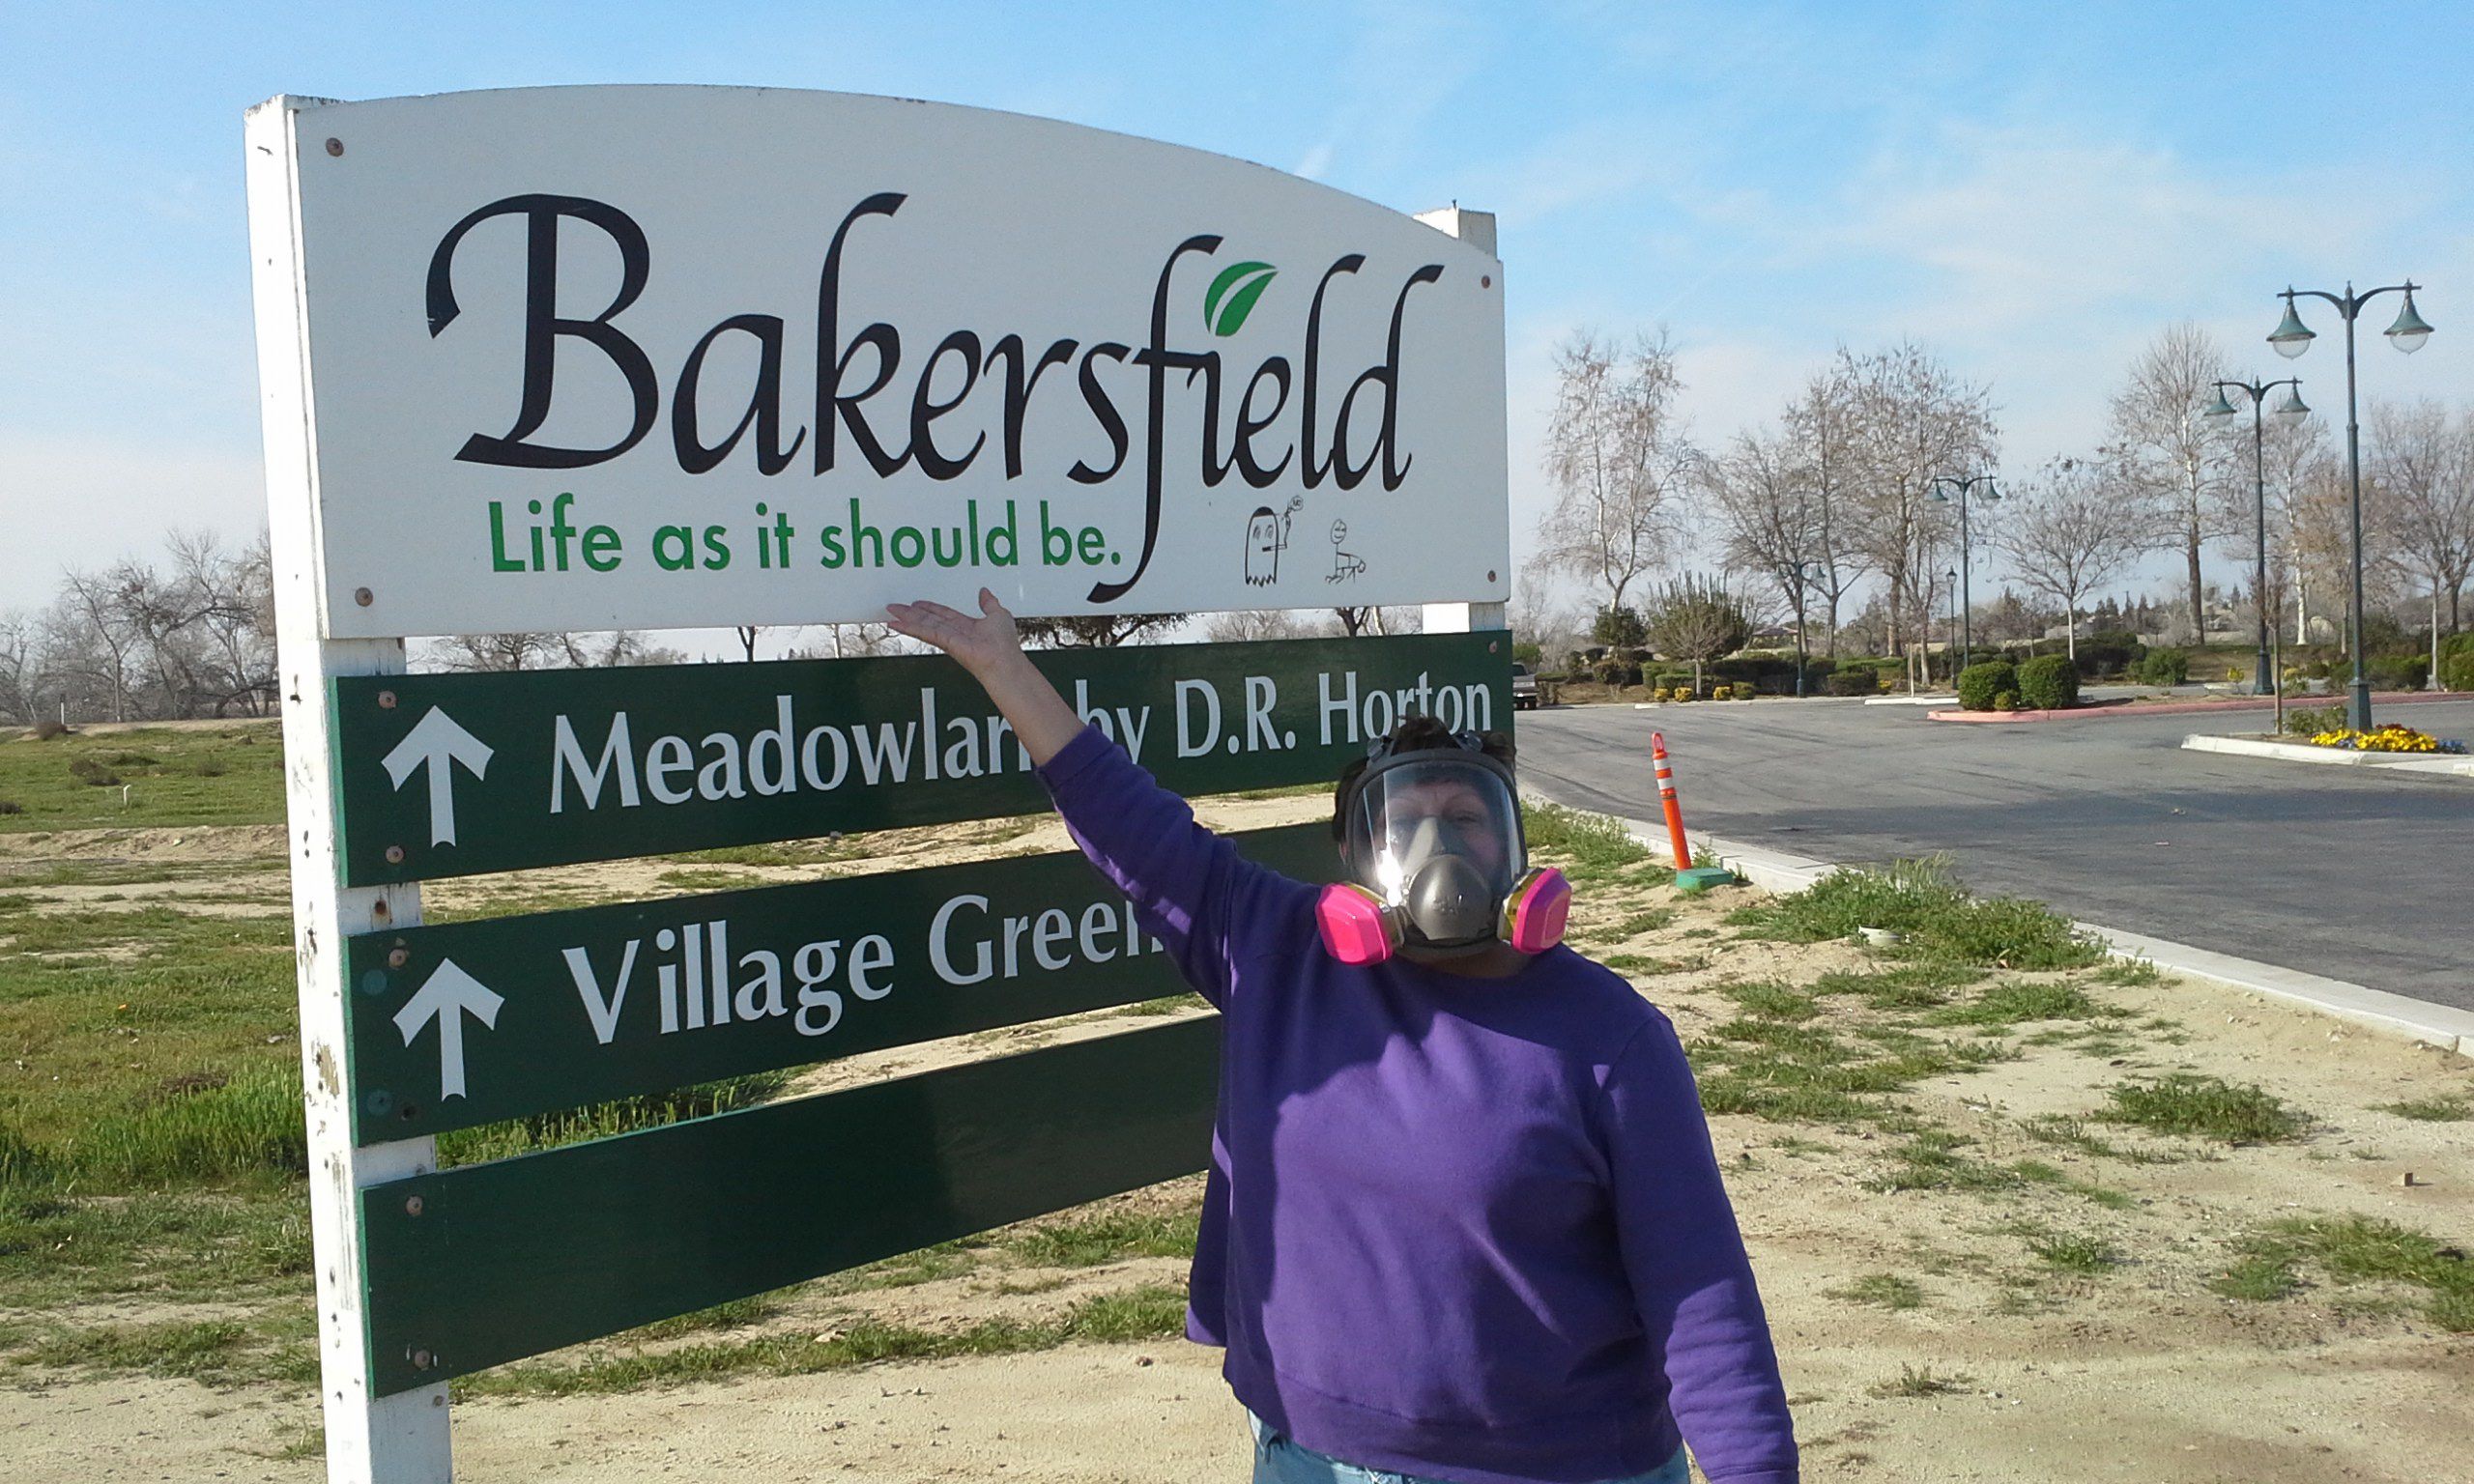 Person in filtering industrial face mask standing next to welcome sign for Bakersfield CA (Life as it should be)